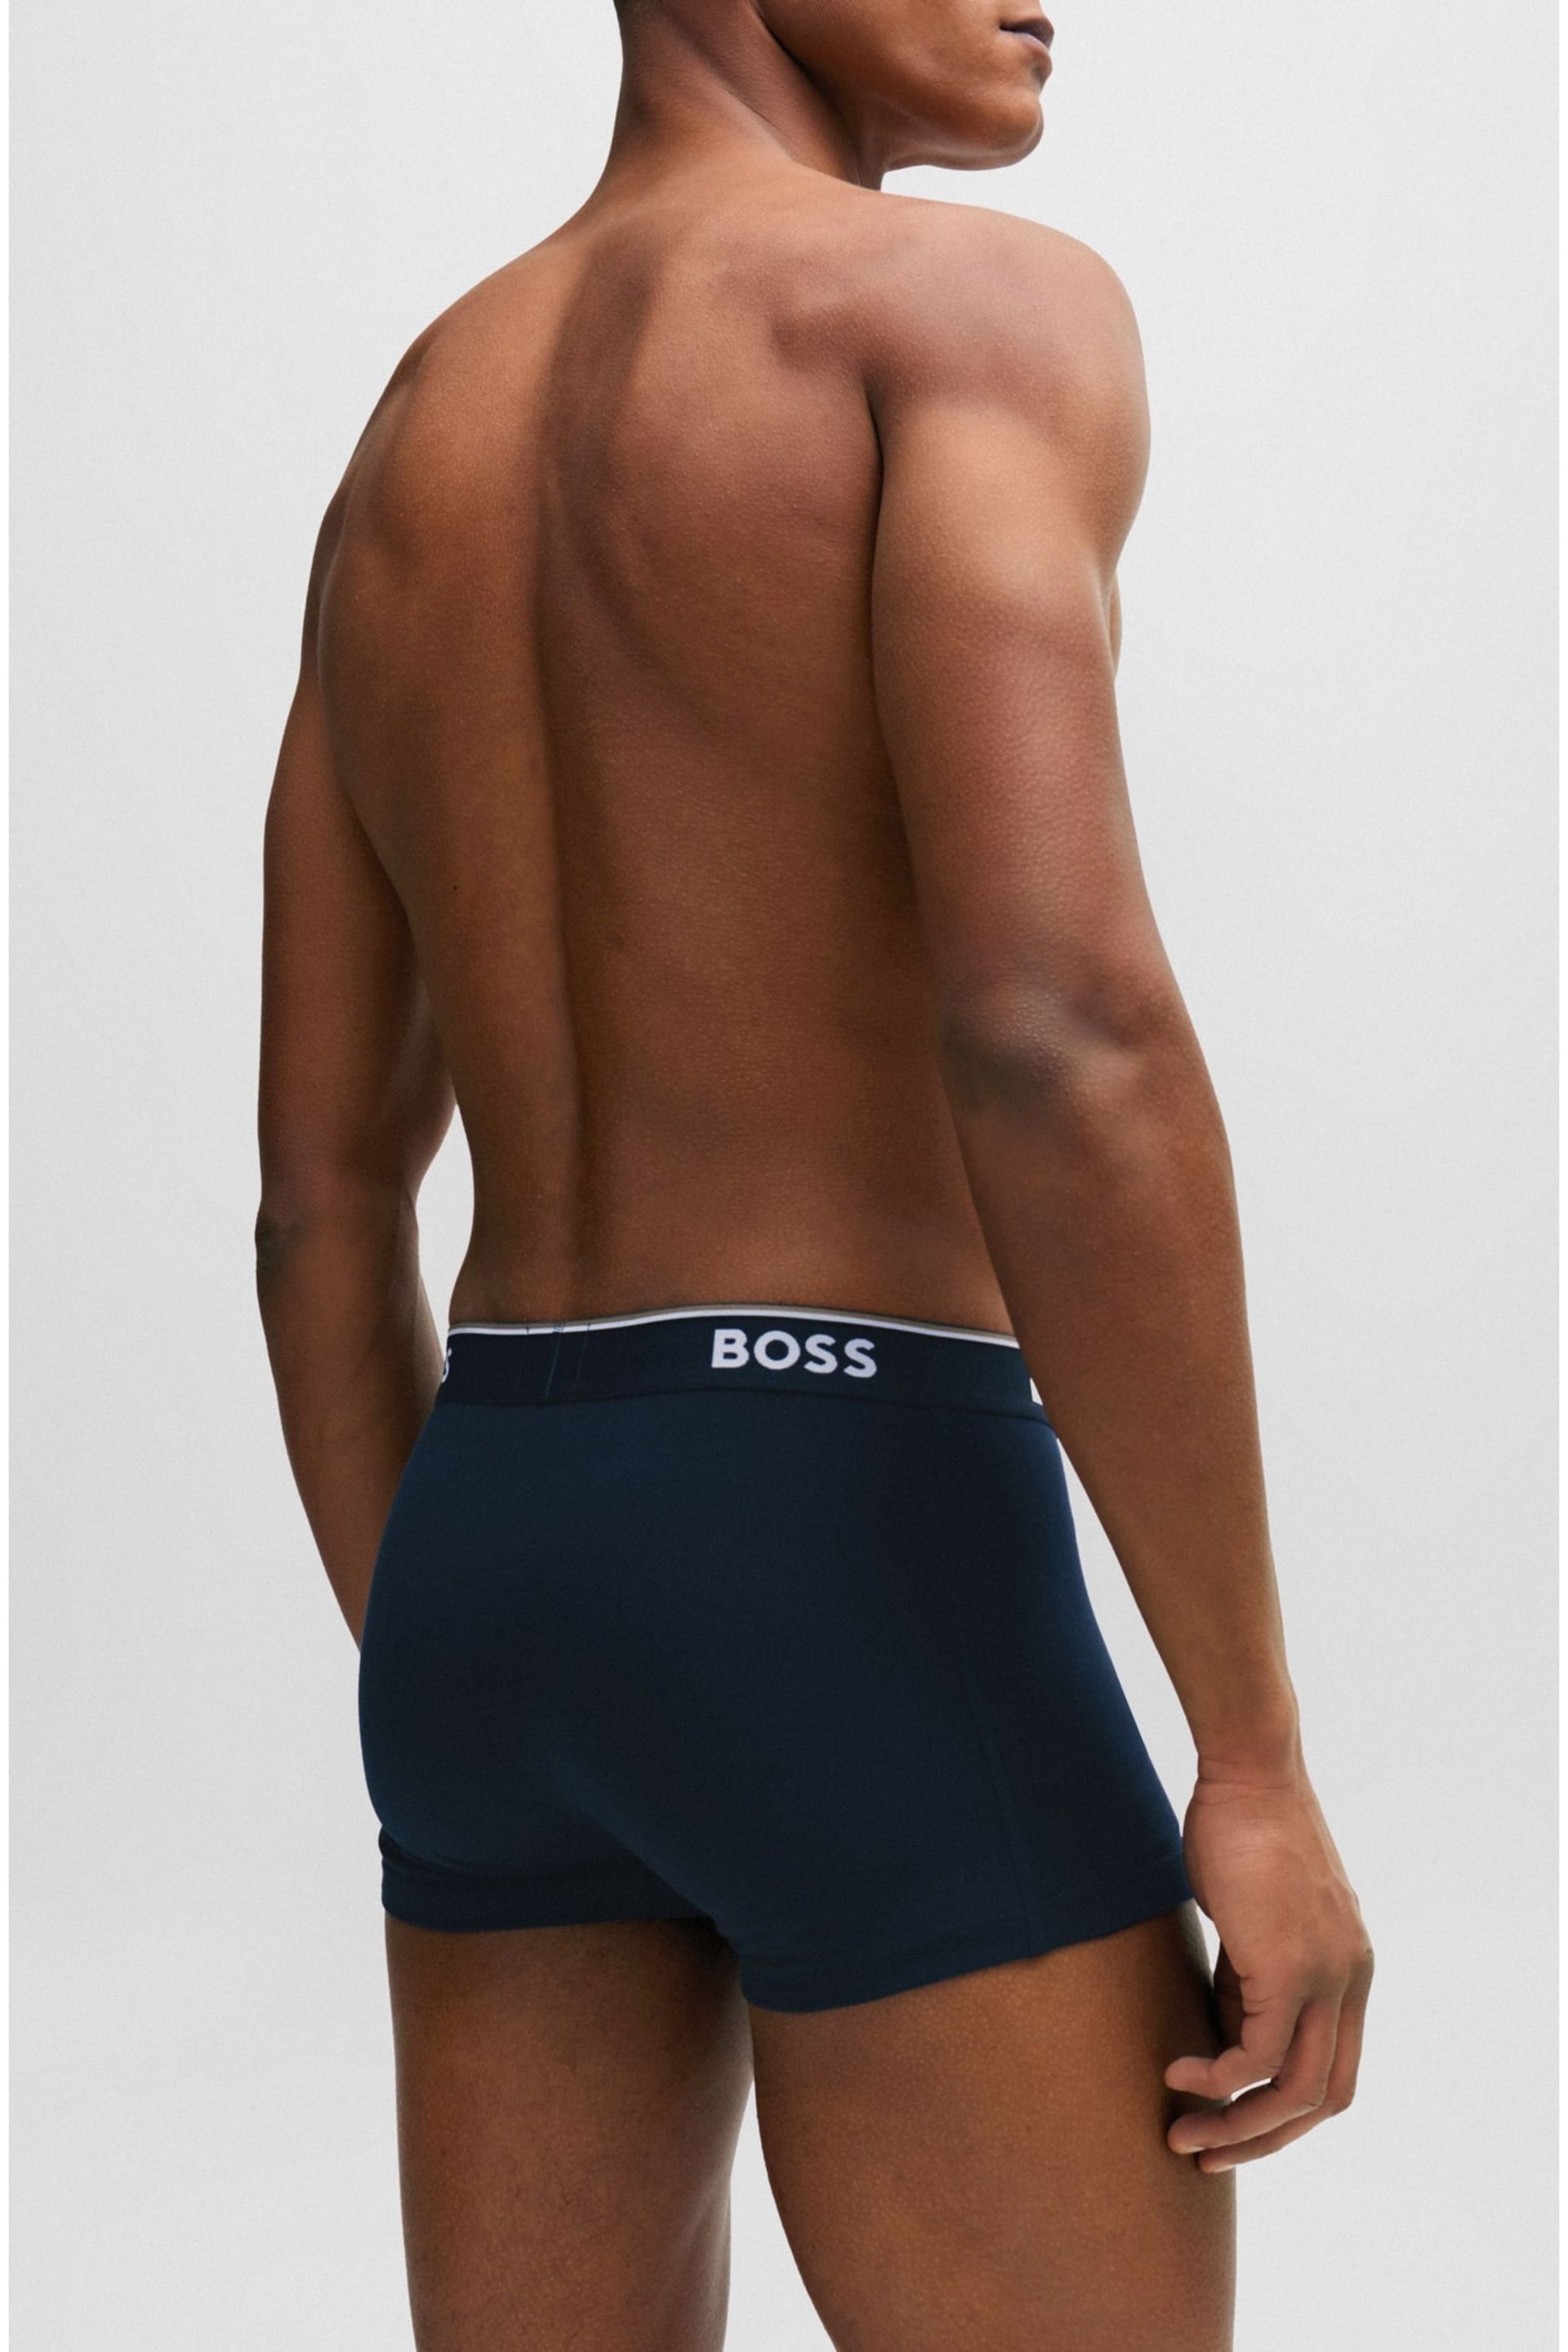 BOSS Red Three-Pack Of Stretch-Cotton Trunks With Logo Waistbands - Image 7 of 7